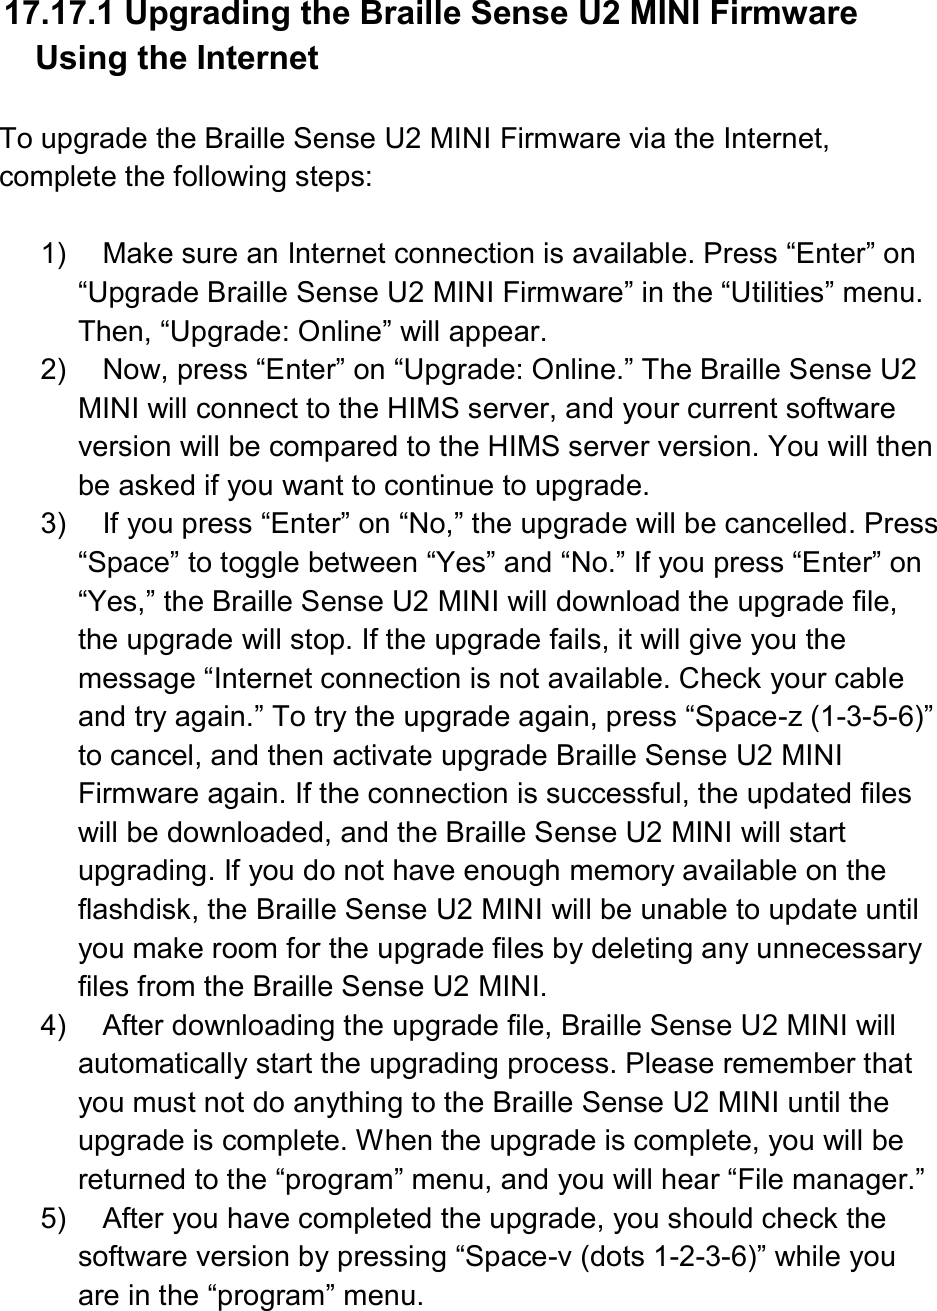  17.17.1 Upgrading the Braille Sense U2 MINI Firmware Using the Internet  To upgrade the Braille Sense U2 MINI Firmware via the Internet, complete the following steps:  1)  Make sure an Internet connection is available. Press “Enter” on “Upgrade Braille Sense U2 MINI Firmware” in the “Utilities” menu. Then, “Upgrade: Online” will appear. 2)  Now, press “Enter” on “Upgrade: Online.” The Braille Sense U2 MINI will connect to the HIMS server, and your current software version will be compared to the HIMS server version. You will then be asked if you want to continue to upgrade. 3)  If you press “Enter” on “No,” the upgrade will be cancelled. Press “Space” to toggle between “Yes” and “No.” If you press “Enter” on “Yes,” the Braille Sense U2 MINI will download the upgrade file, the upgrade will stop. If the upgrade fails, it will give you the message “Internet connection is not available. Check your cable and try again.” To try the upgrade again, press “Space-z (1-3-5-6)” to cancel, and then activate upgrade Braille Sense U2 MINI Firmware again. If the connection is successful, the updated files will be downloaded, and the Braille Sense U2 MINI will start upgrading. If you do not have enough memory available on the flashdisk, the Braille Sense U2 MINI will be unable to update until you make room for the upgrade files by deleting any unnecessary files from the Braille Sense U2 MINI. 4)  After downloading the upgrade file, Braille Sense U2 MINI will automatically start the upgrading process. Please remember that you must not do anything to the Braille Sense U2 MINI until the upgrade is complete. When the upgrade is complete, you will be returned to the “program” menu, and you will hear “File manager.” 5)  After you have completed the upgrade, you should check the software version by pressing “Space-v (dots 1-2-3-6)” while you are in the “program” menu.  